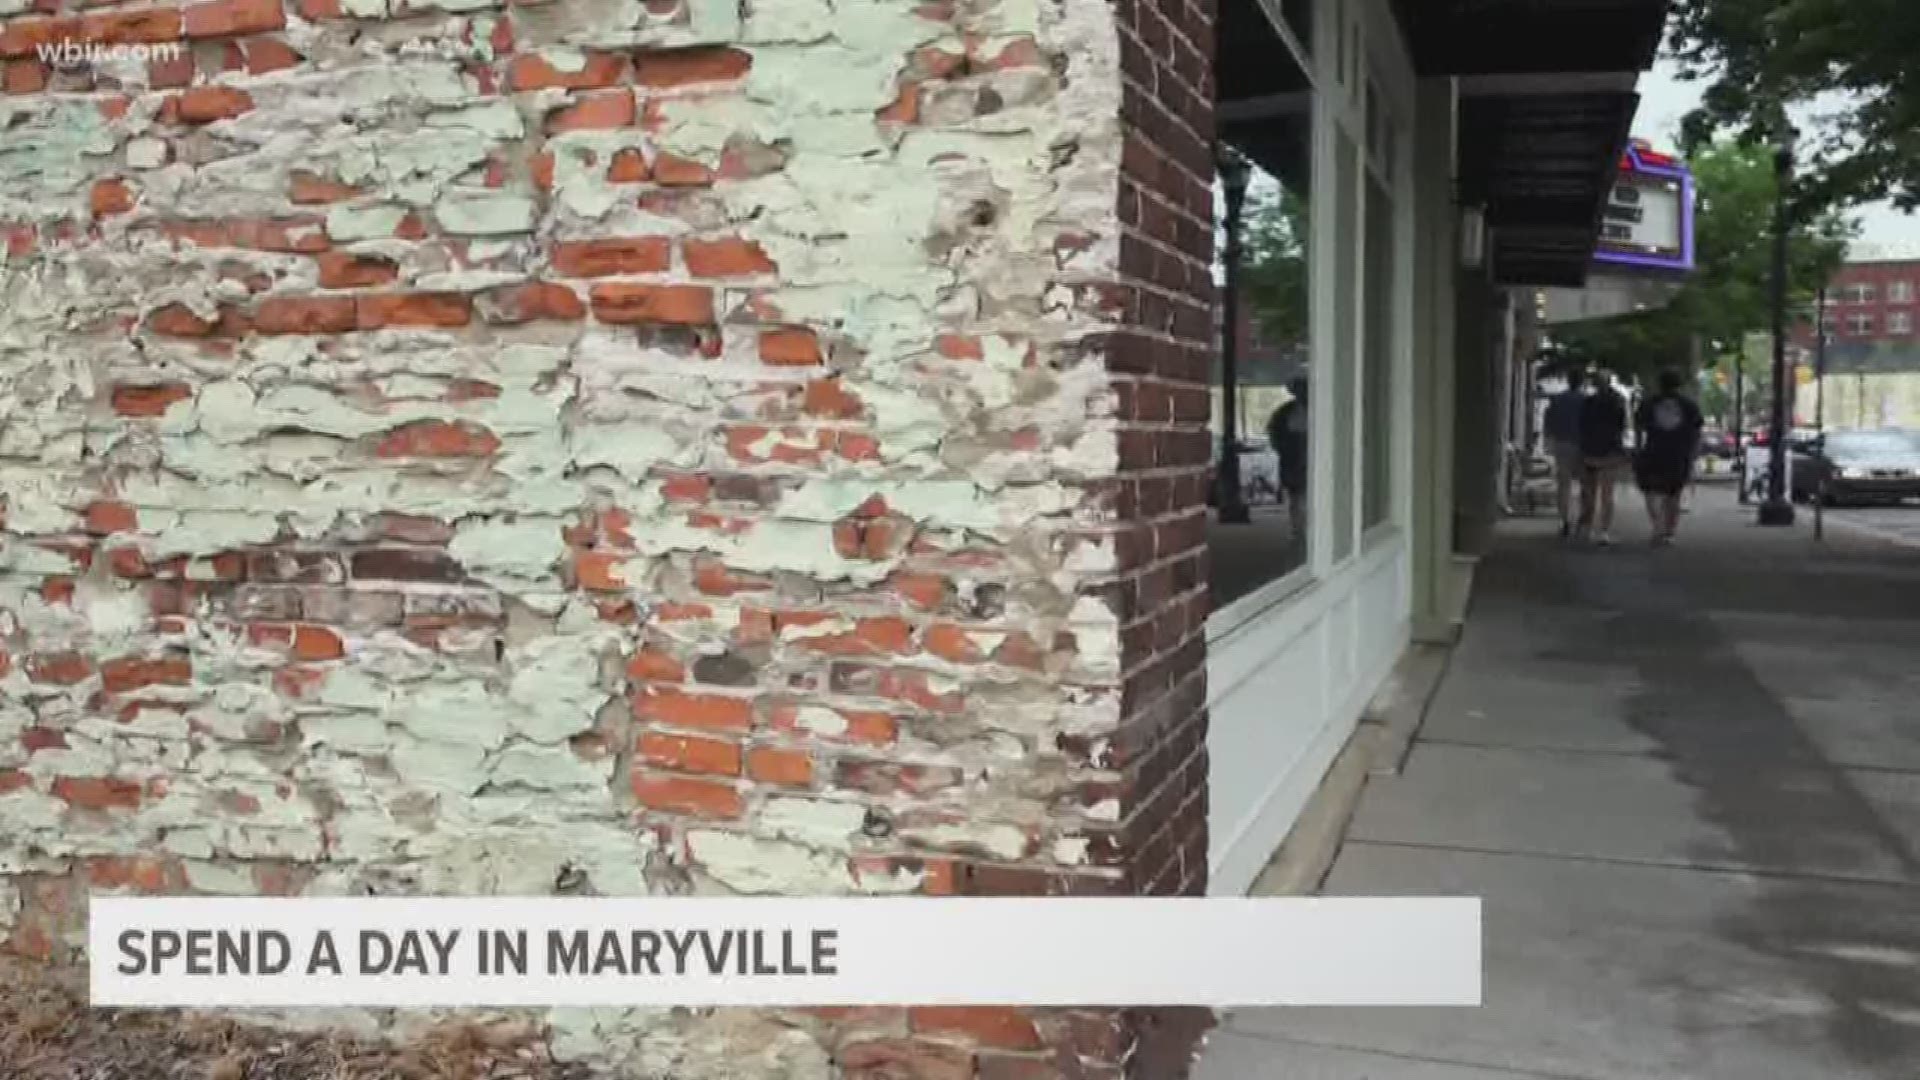 Maryville Downtown Association working on new projects.